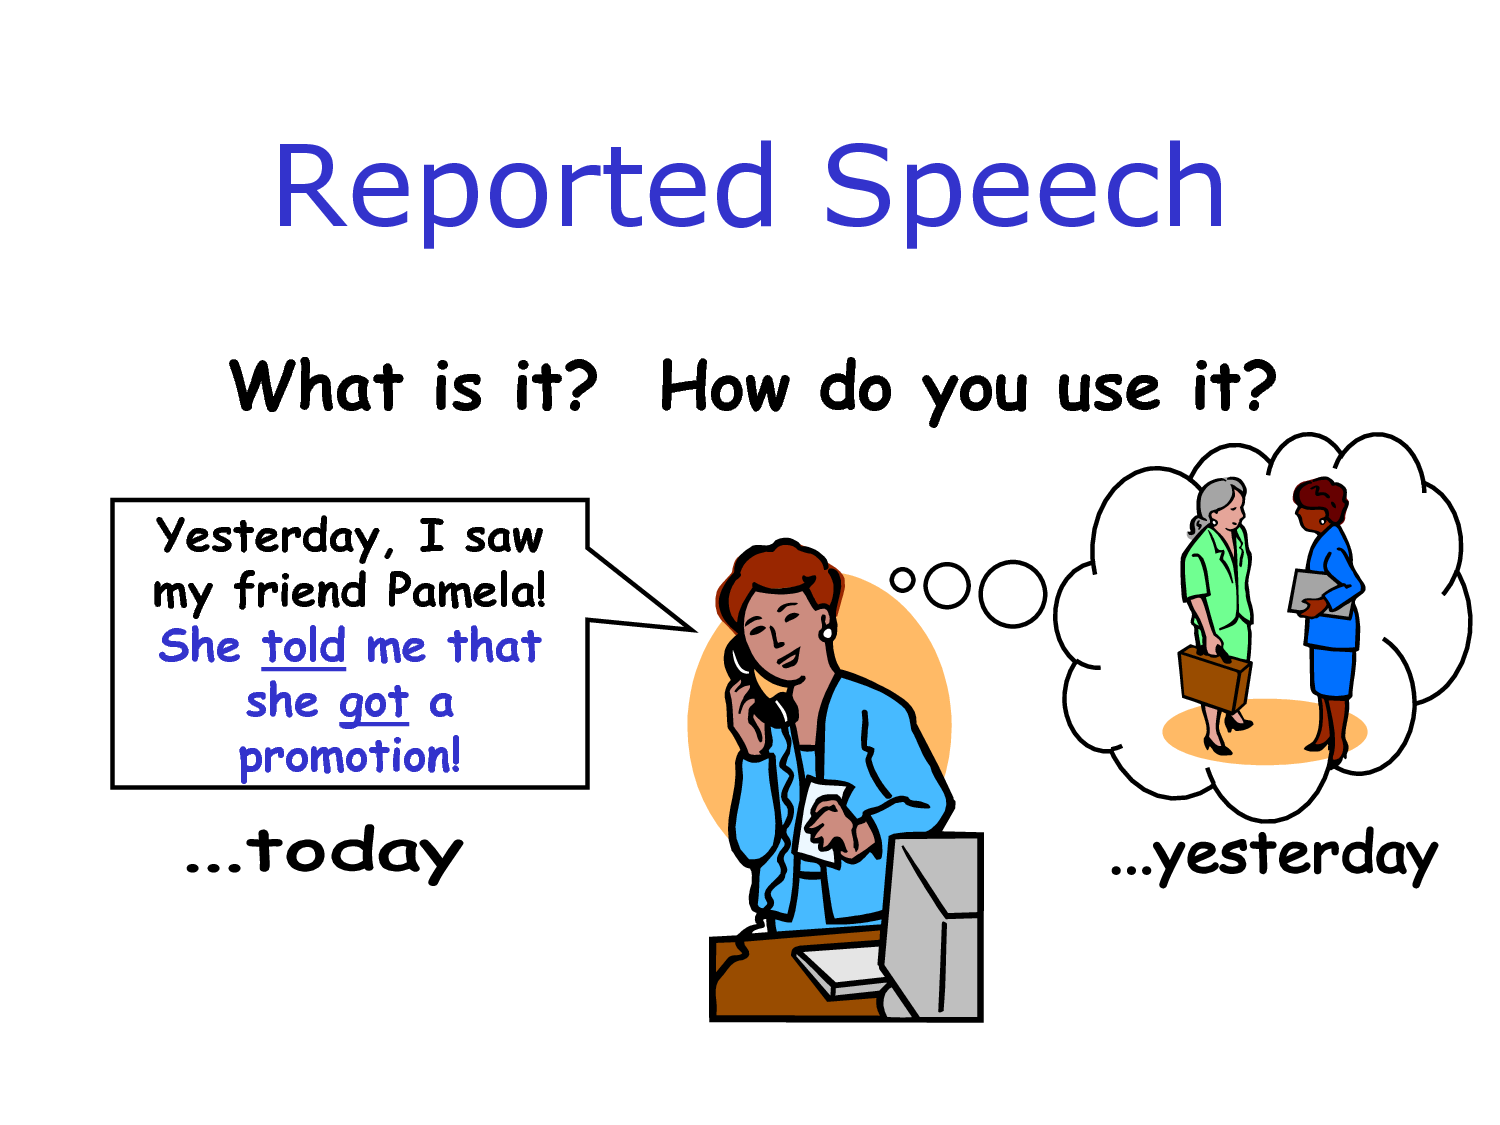 direct and indirect speech video